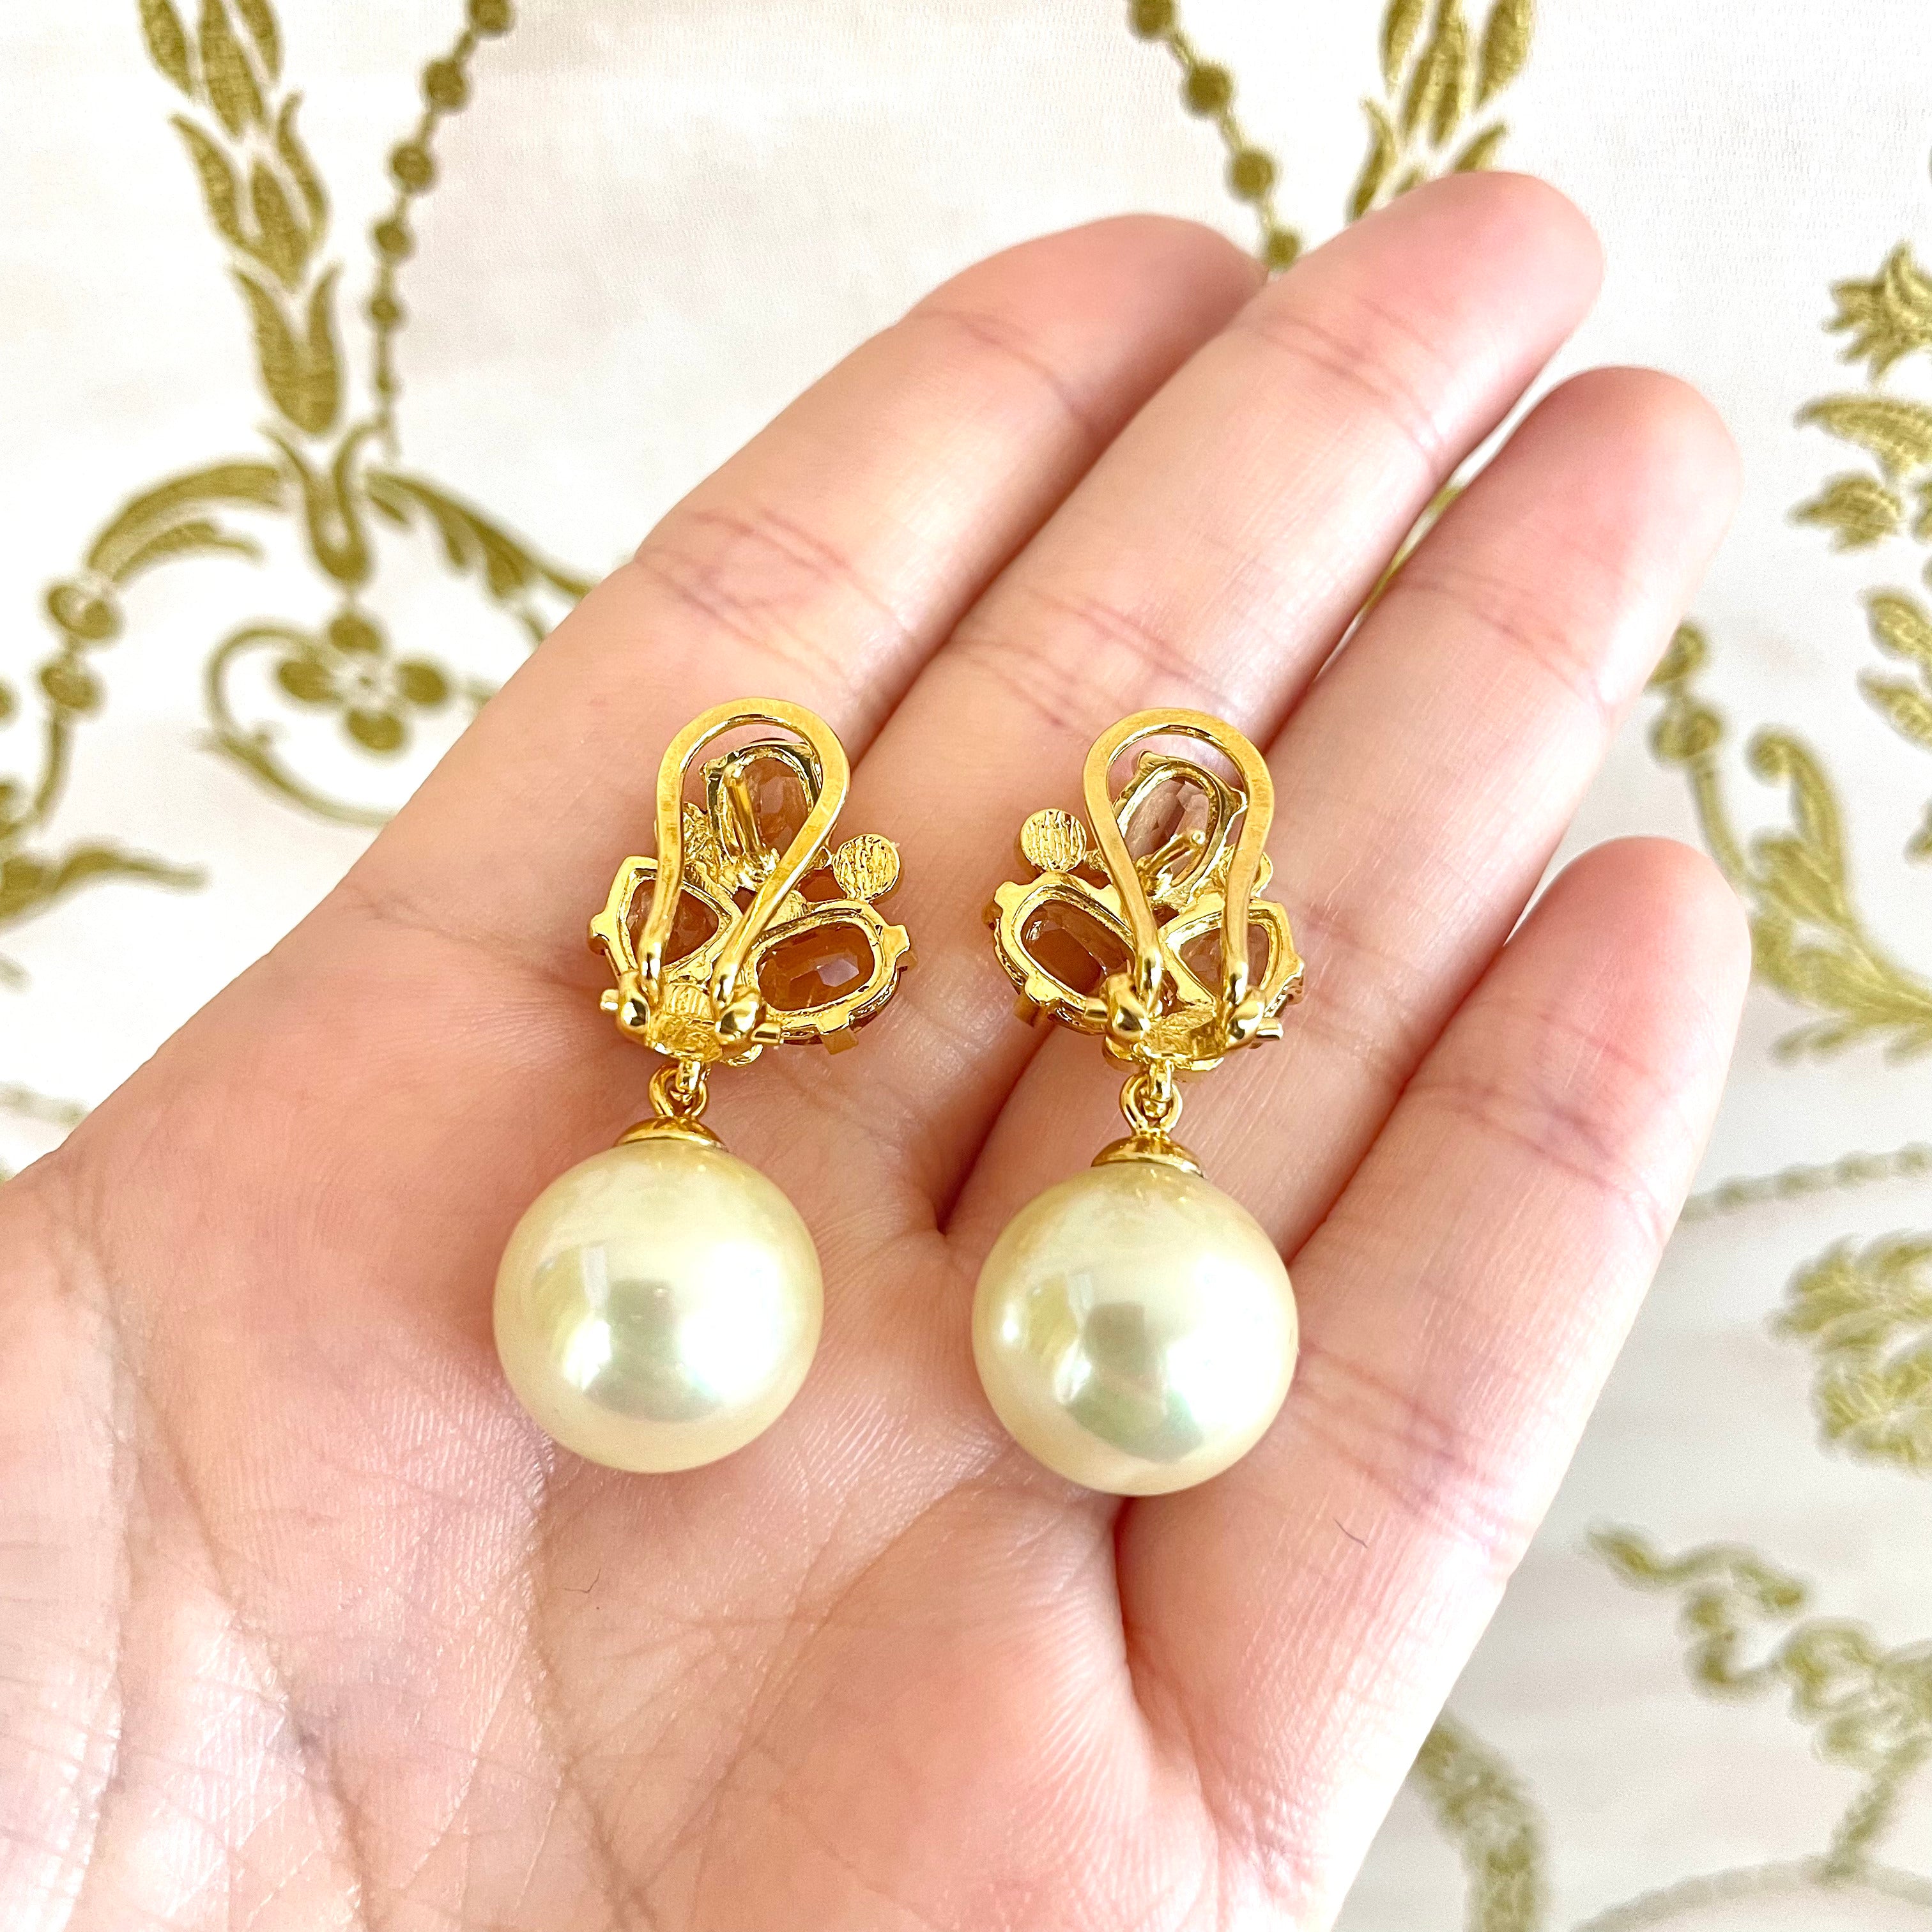 Mallorca pearls with Swarovski crystals earrings